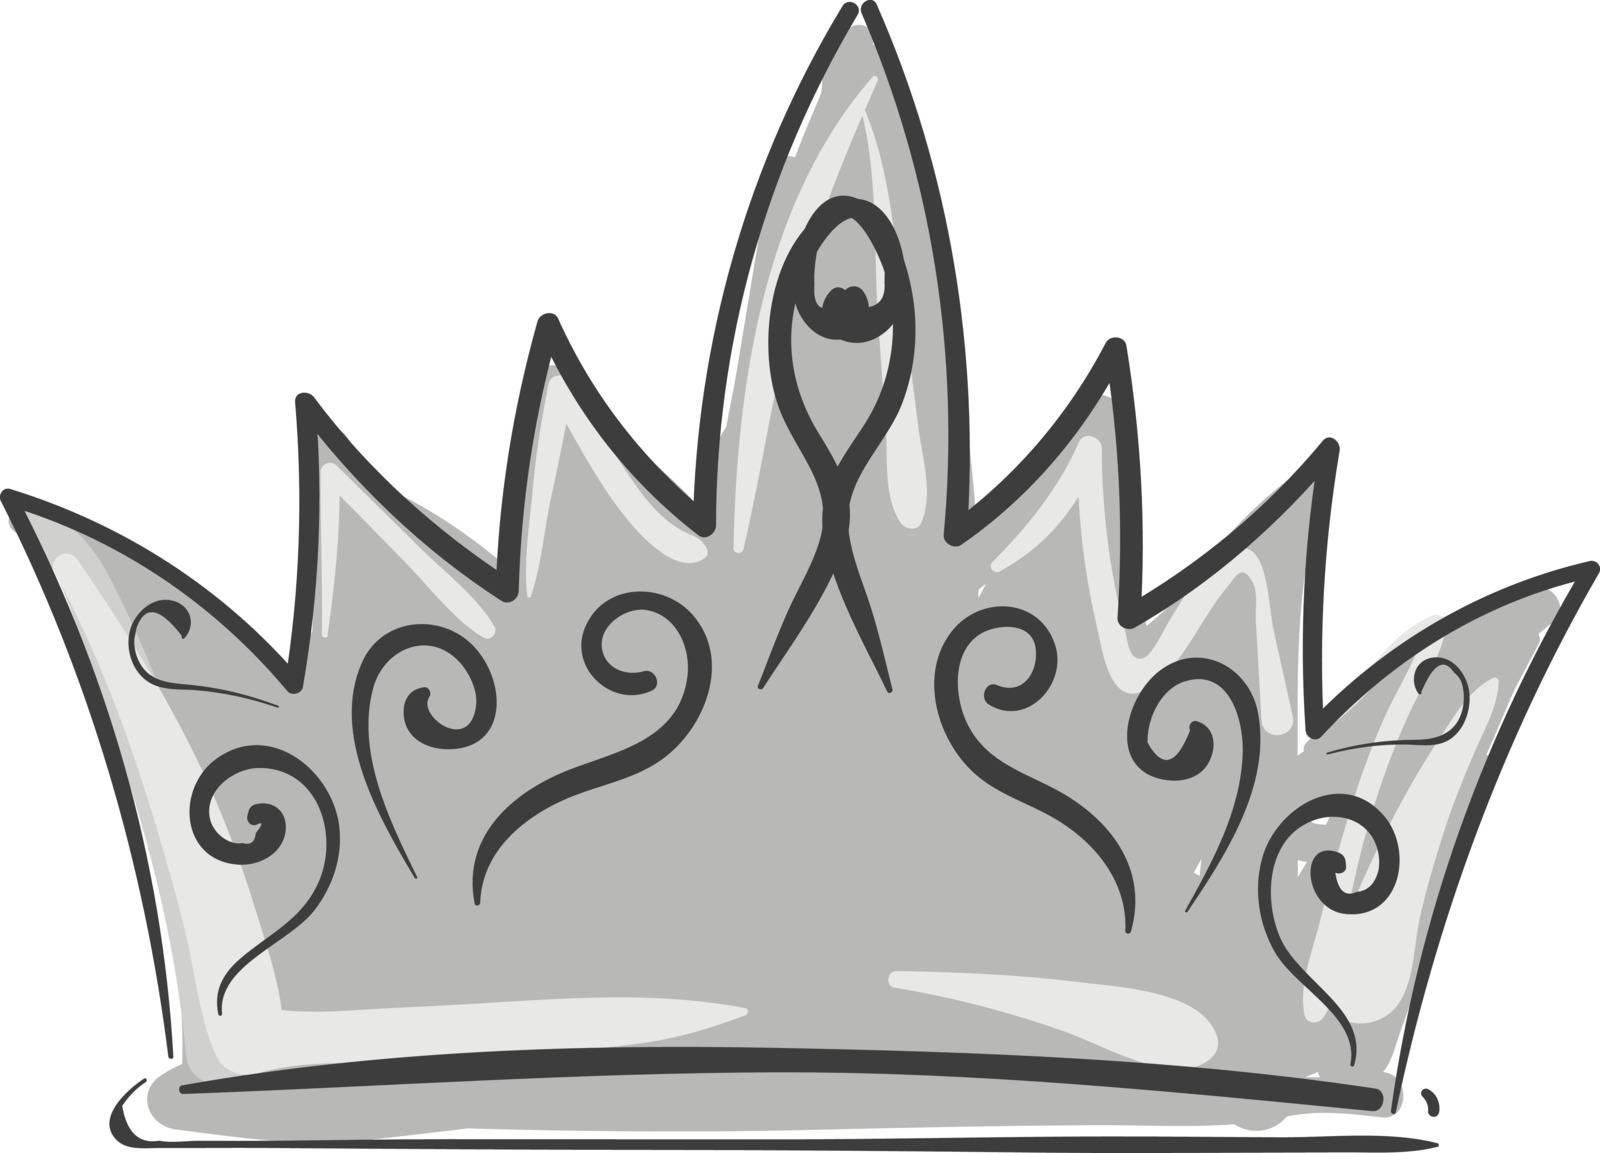 A crown with precious metals and jewels is the circular ornamental headdress typically worn by the queen or king in reign, or, people with higher authority, vector, color drawing or illustration.